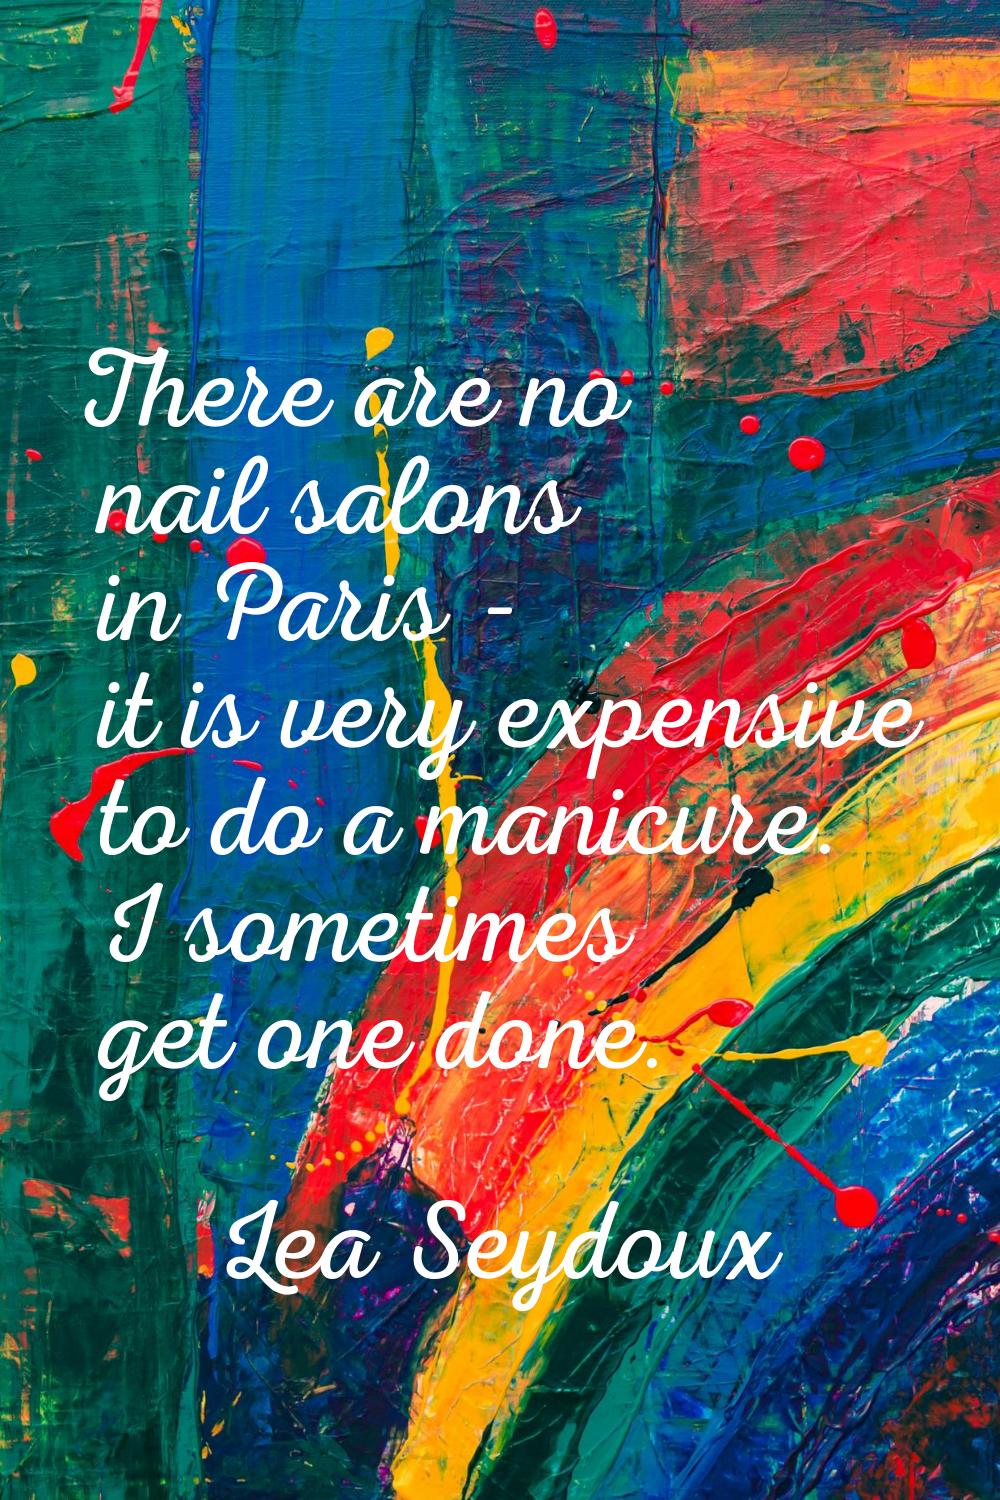 There are no nail salons in Paris - it is very expensive to do a manicure. I sometimes get one done